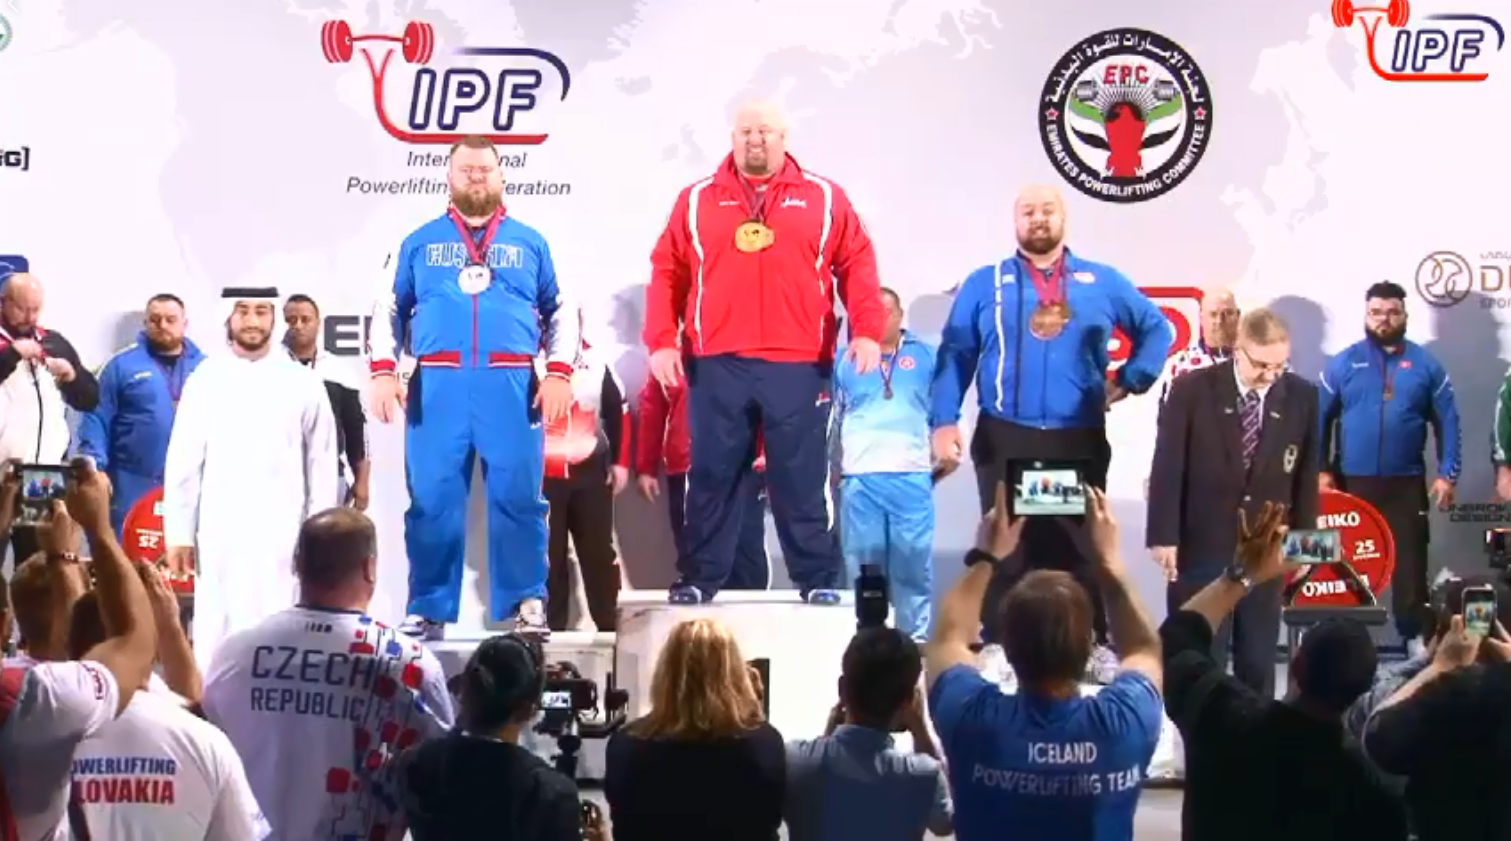 Sumner triumphs on final day of IPF World Open Powerlifting Championships